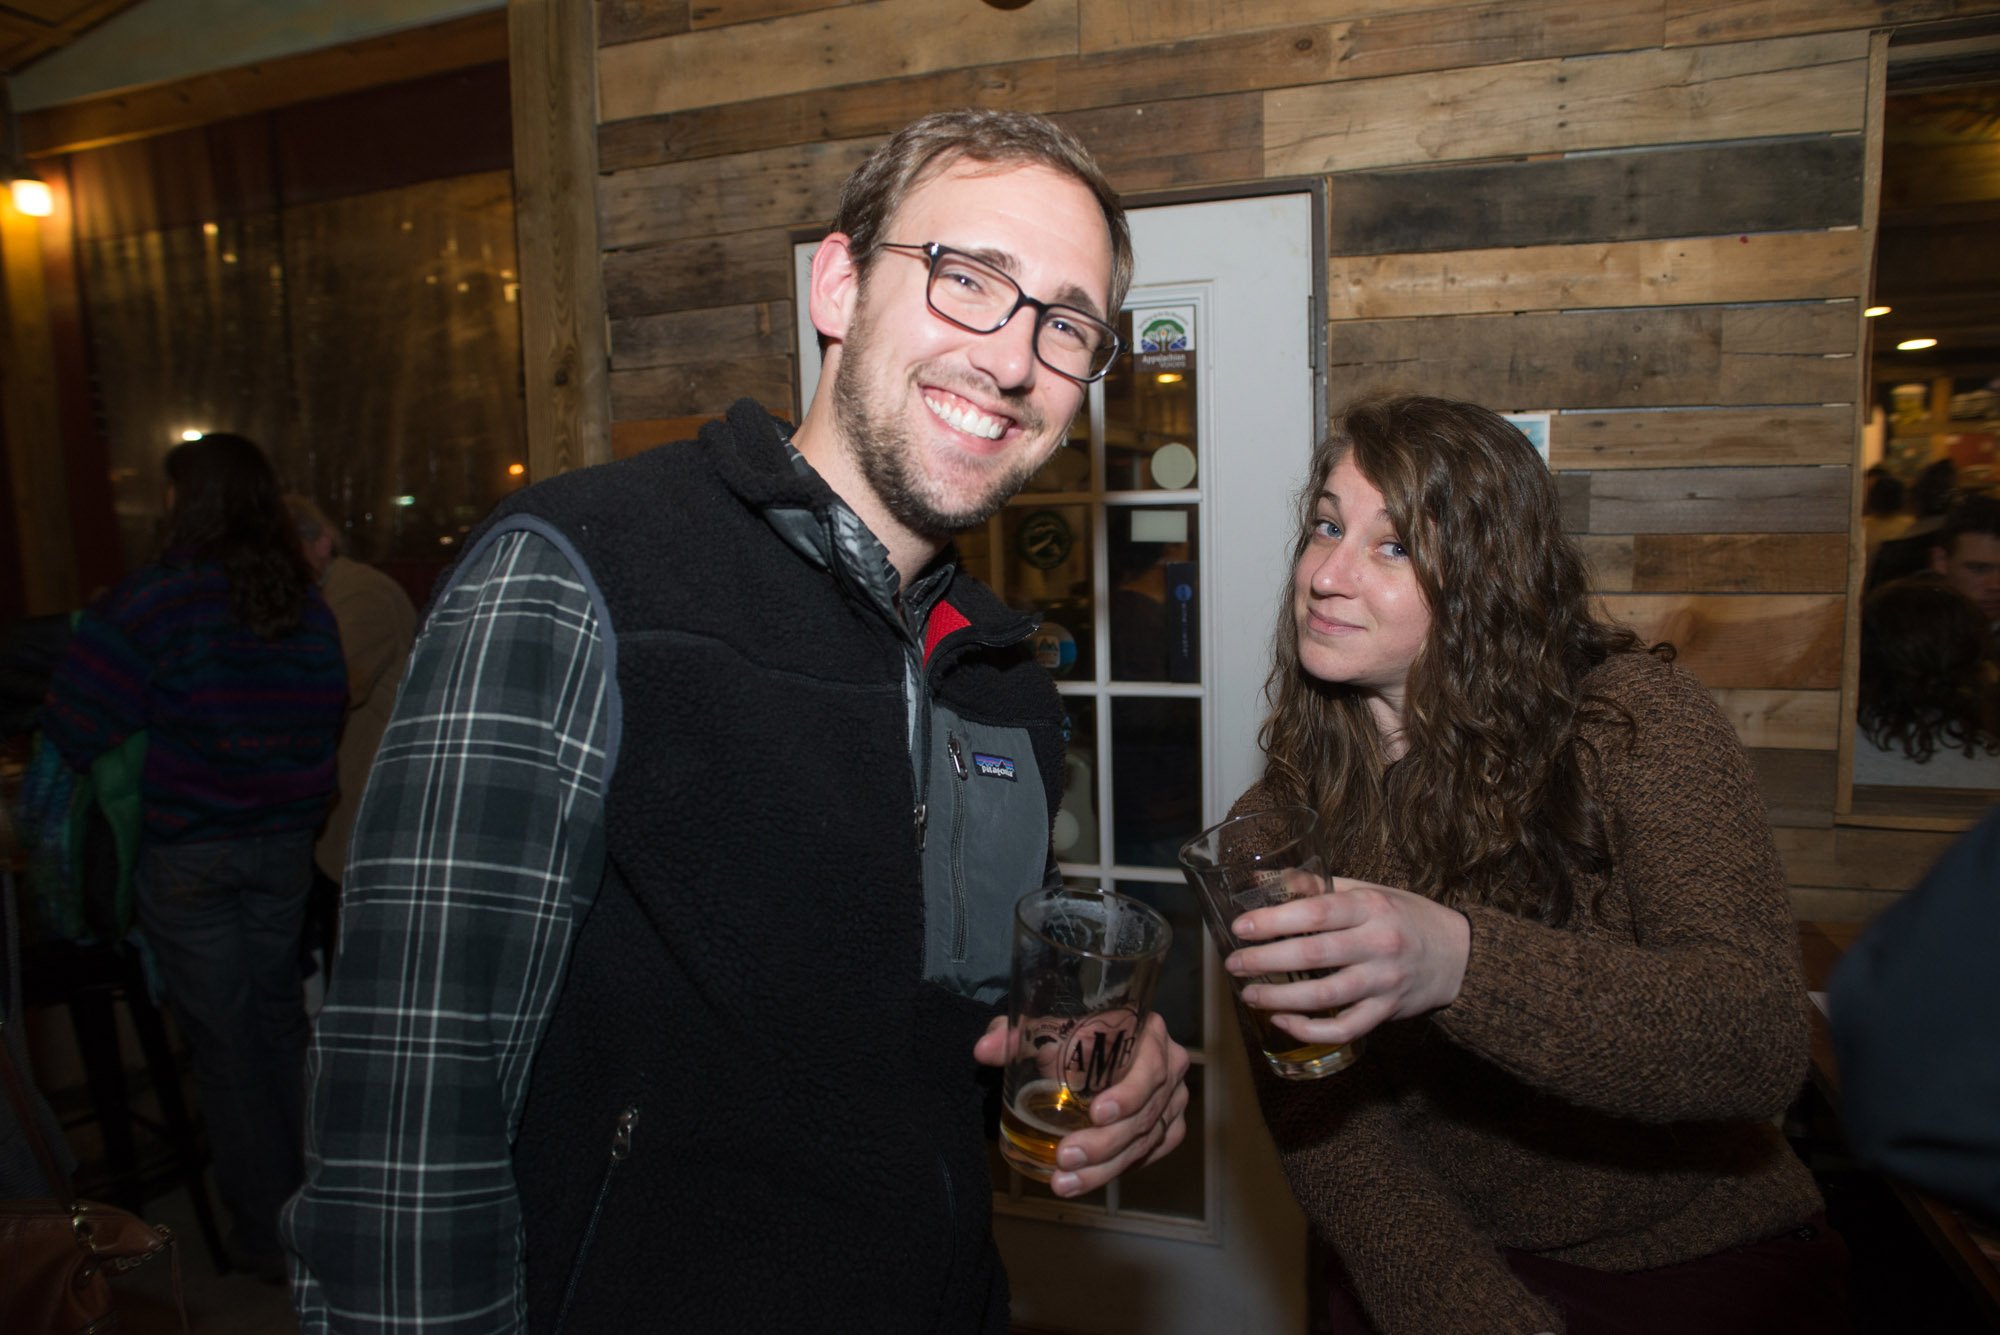 MountainTrue Comes to the High Country with a Kick-off Event in Boone